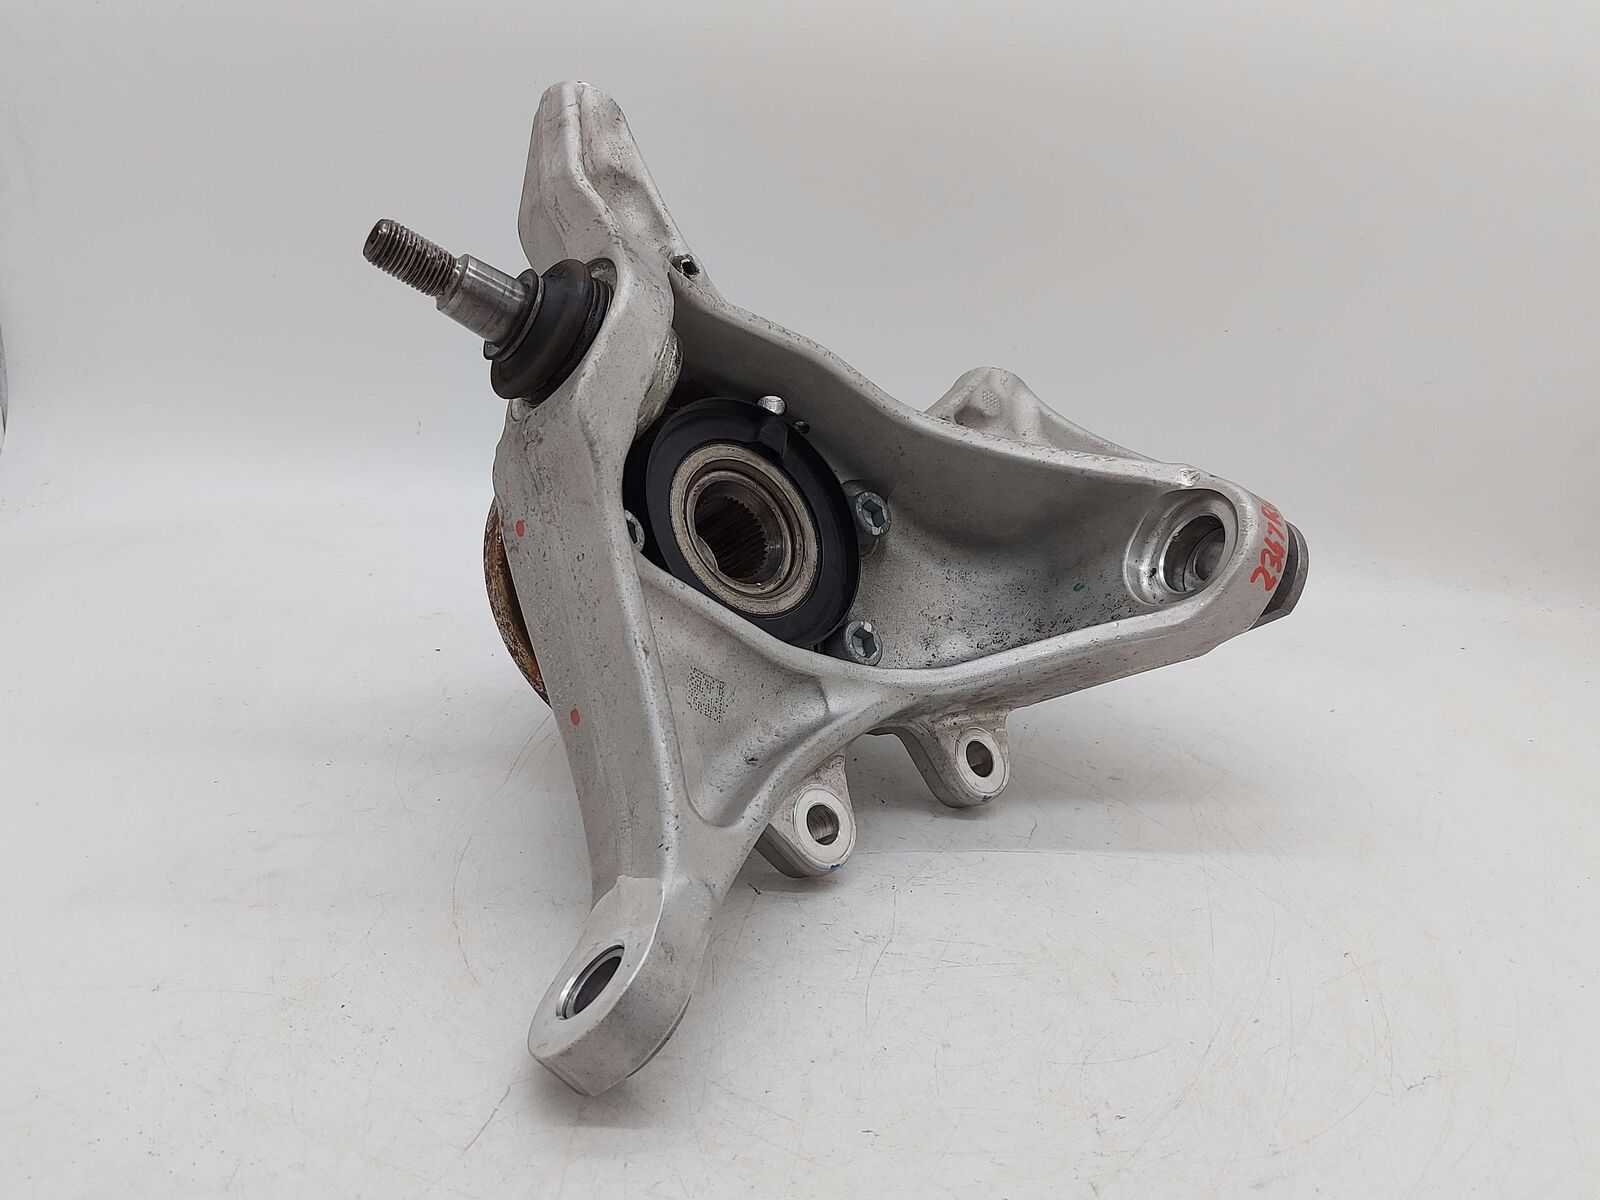 2021 MCLAREN GT REAR RH RIGHT SPINDLE KNUCKLE HUB 14B0576CP 03